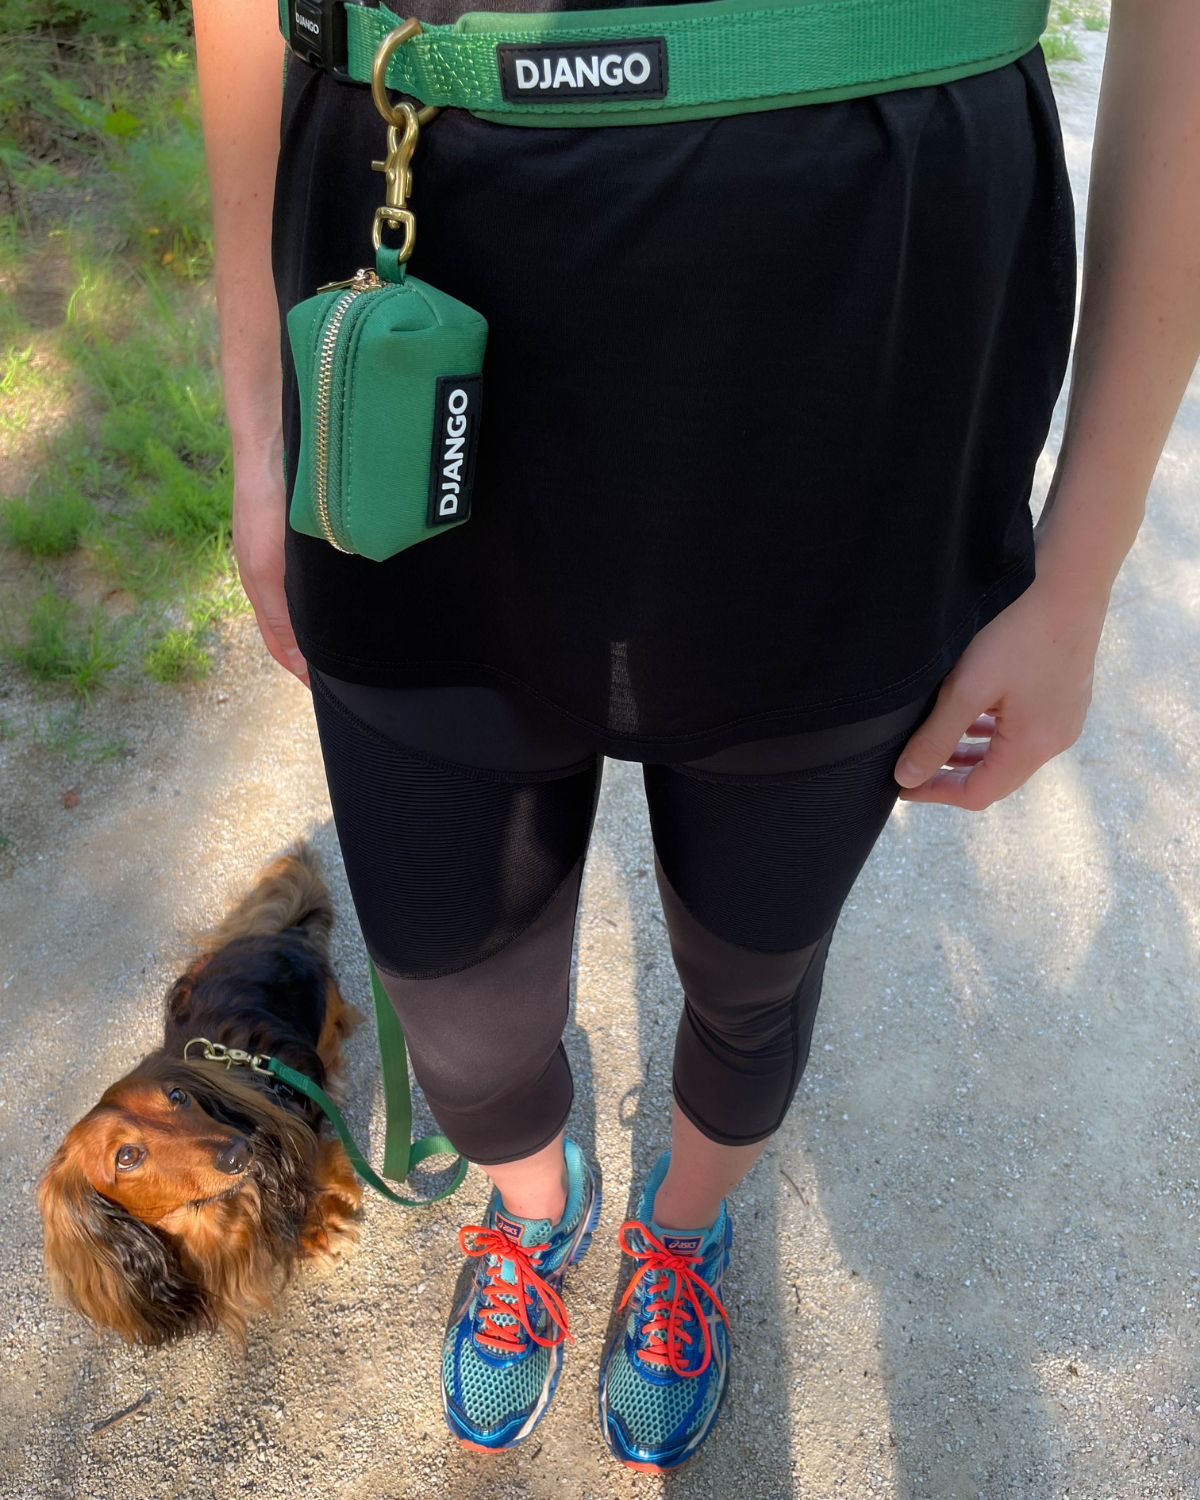 DJANGO Dog Waste Bag Holder in Forest Green - Chic and classy poop bag holder for dogs - Neoprene with beautiful solid brass hardware - djangobrand.com